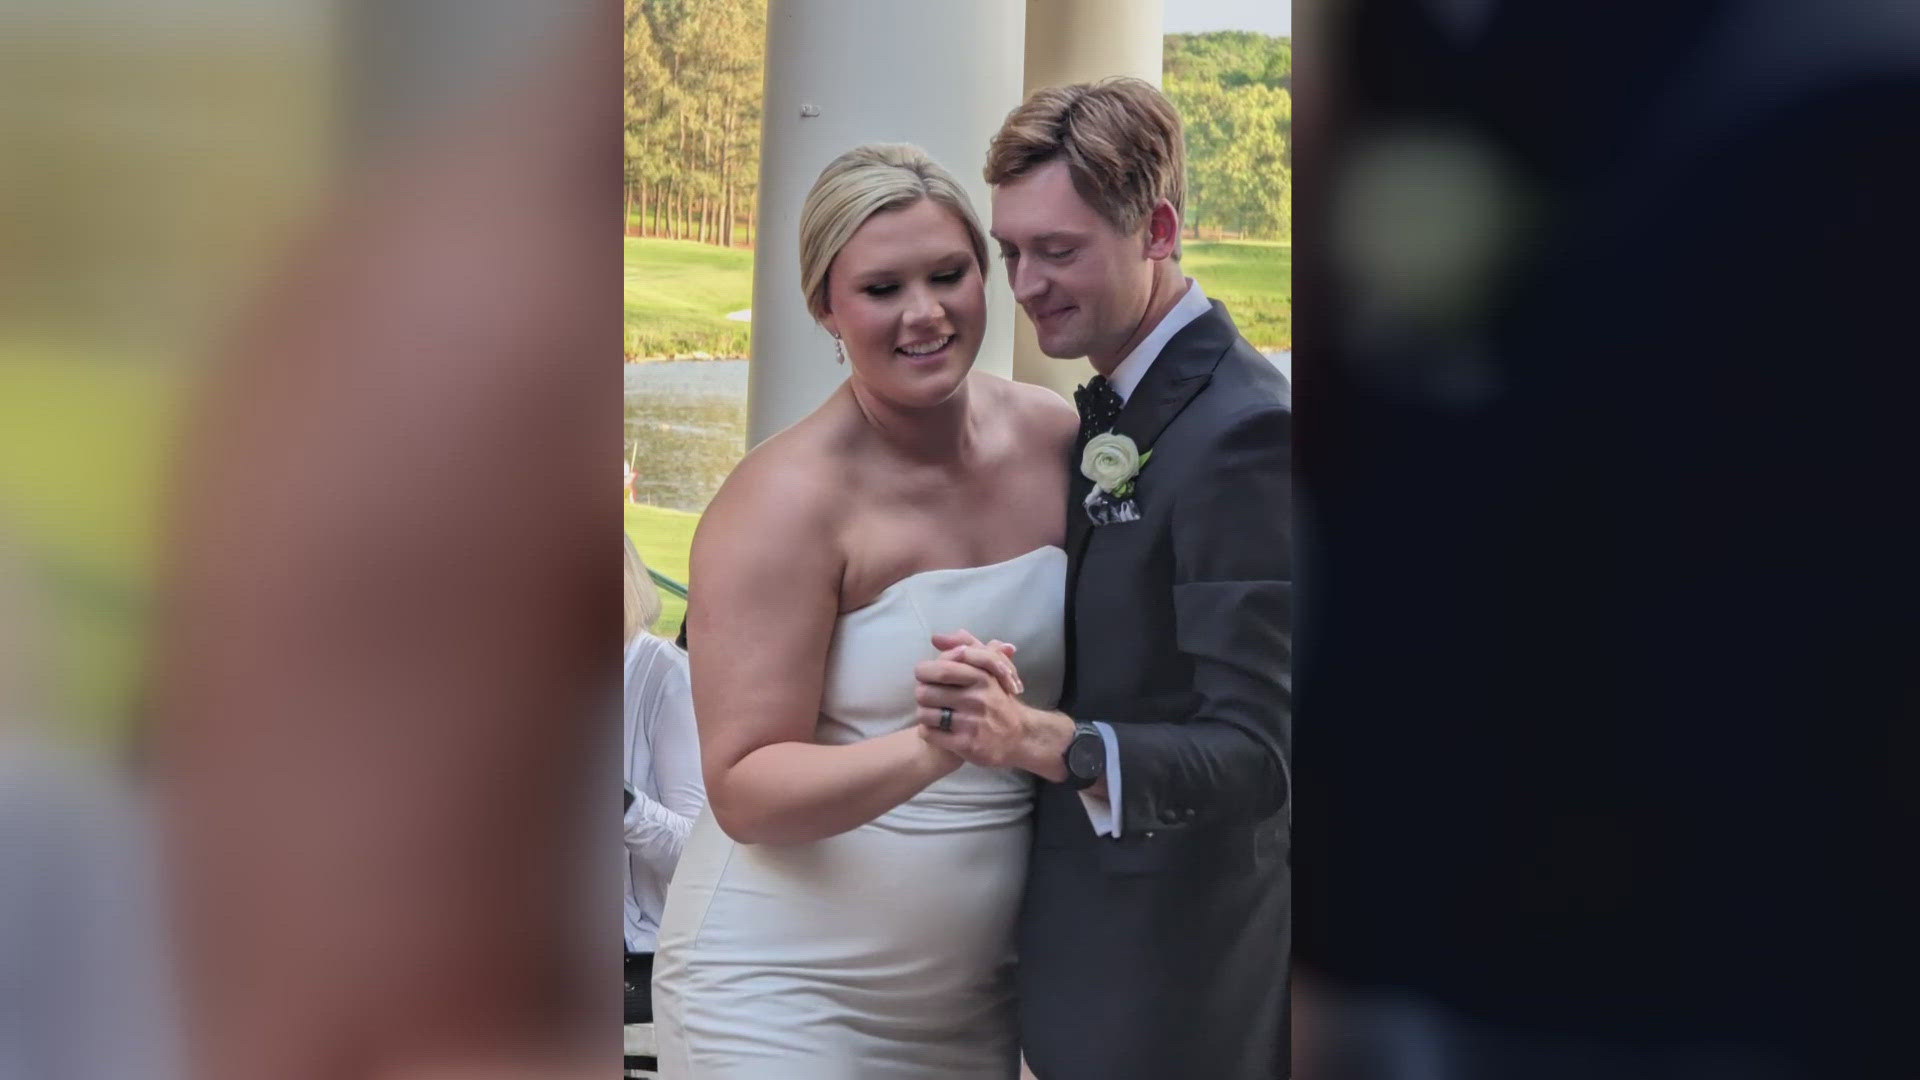 WFMY News 2's Eric Chilton talks about how going to a wedding helped his relationship.